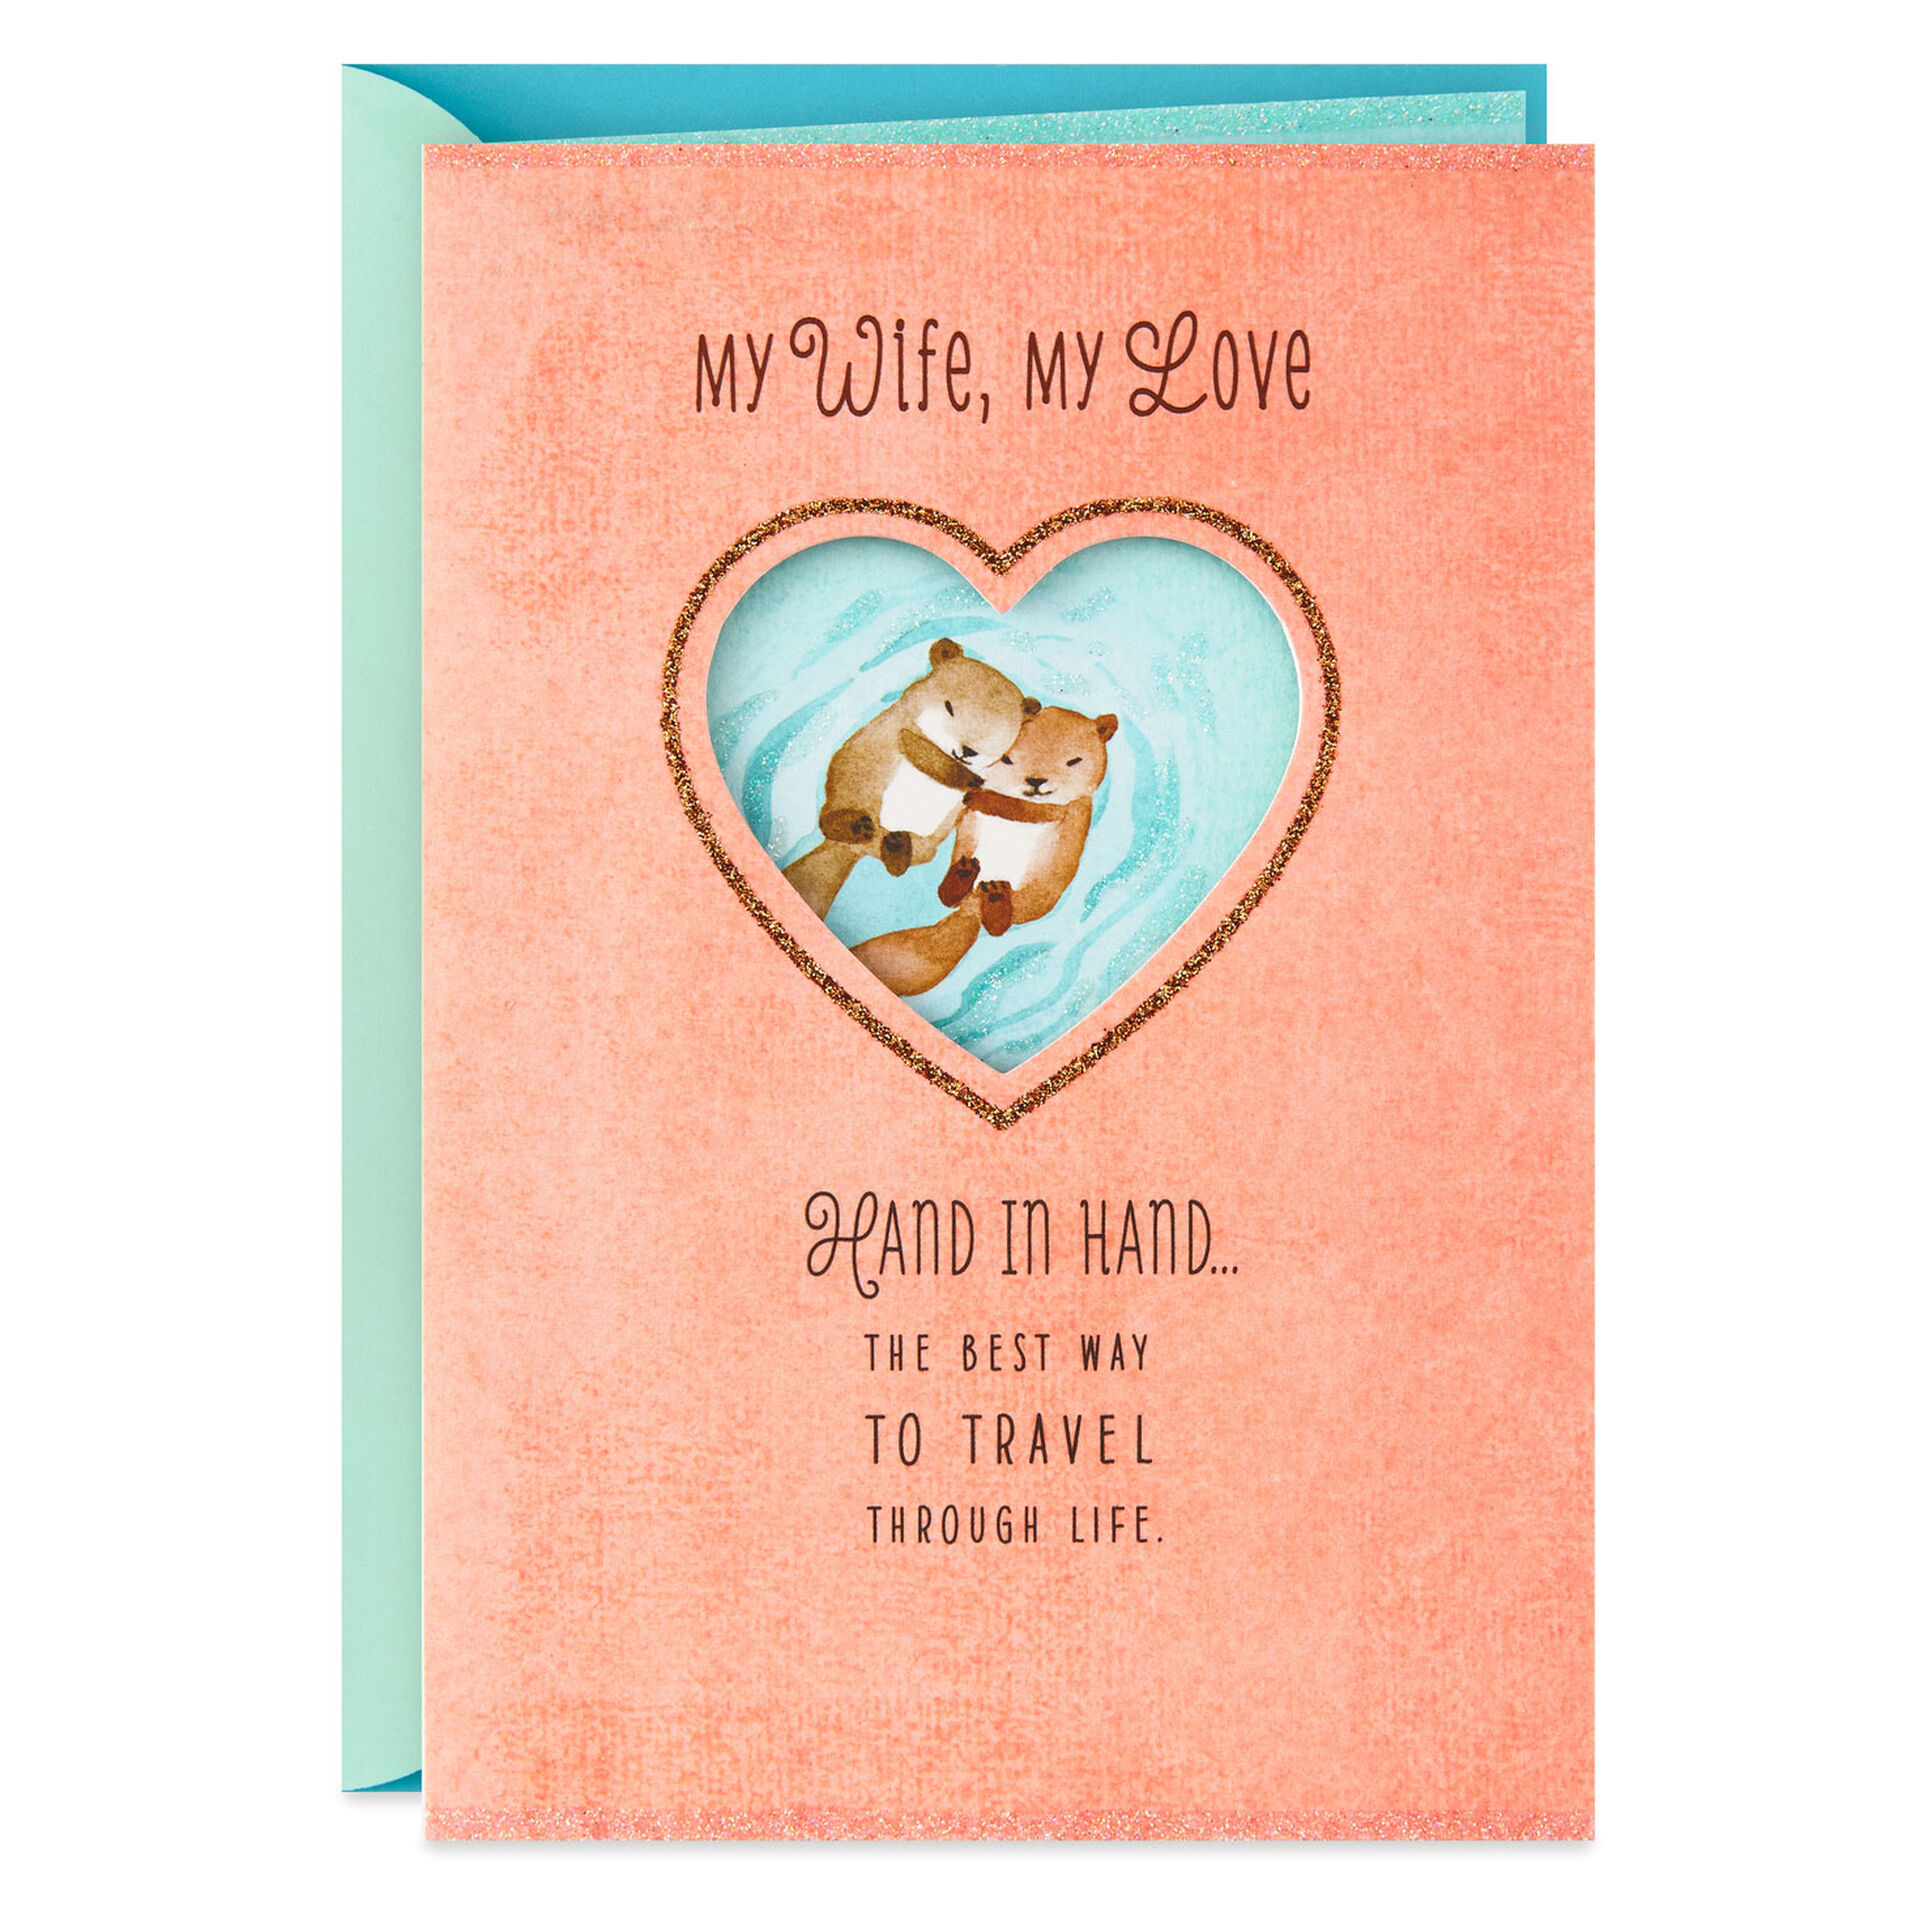 Sea-Otters-and-Heart-Anniversary-Card-for-Wife_459AVY2818_01